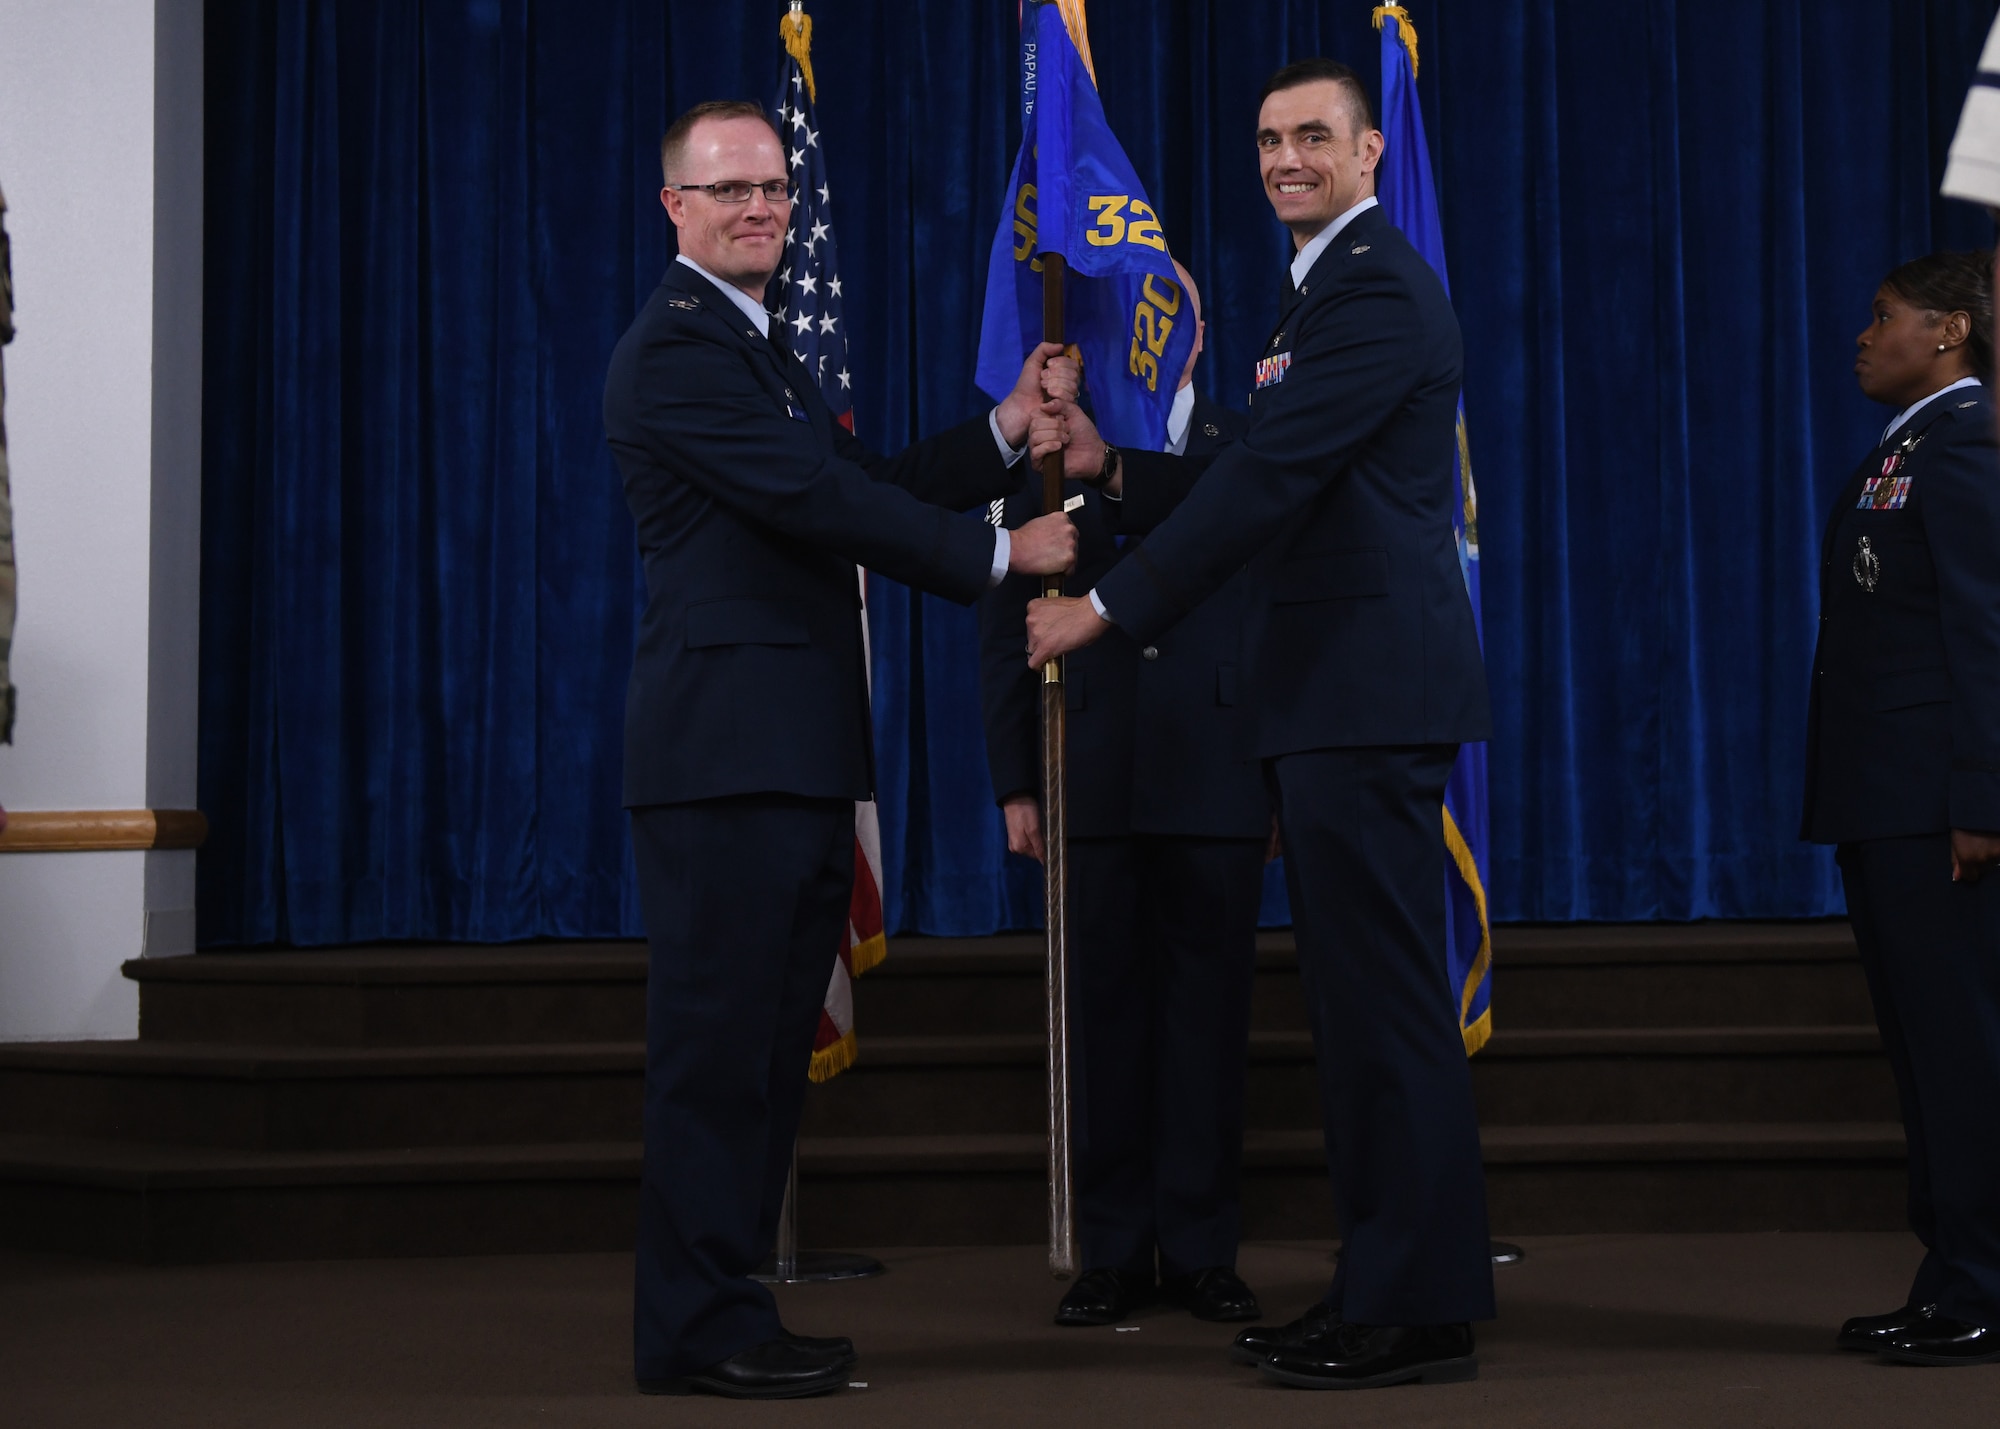 Col. Jared Nelson, commander of the 90th Operations Group, passes the guidon to Lt. Col. Aaron Linton, the incoming commander of the 320th Missile Squadron, during a change of command ceremony on F.E. Warren Air Force Base, Wyoming, June 21, 2022. The change of command ceremony signifies the transition of command from Lt. Col. Janet Dewese, the outgoing commander of 320 MS, to Linton. (U.S. Air Force photo by Airman 1st Class Darius Frazier.)